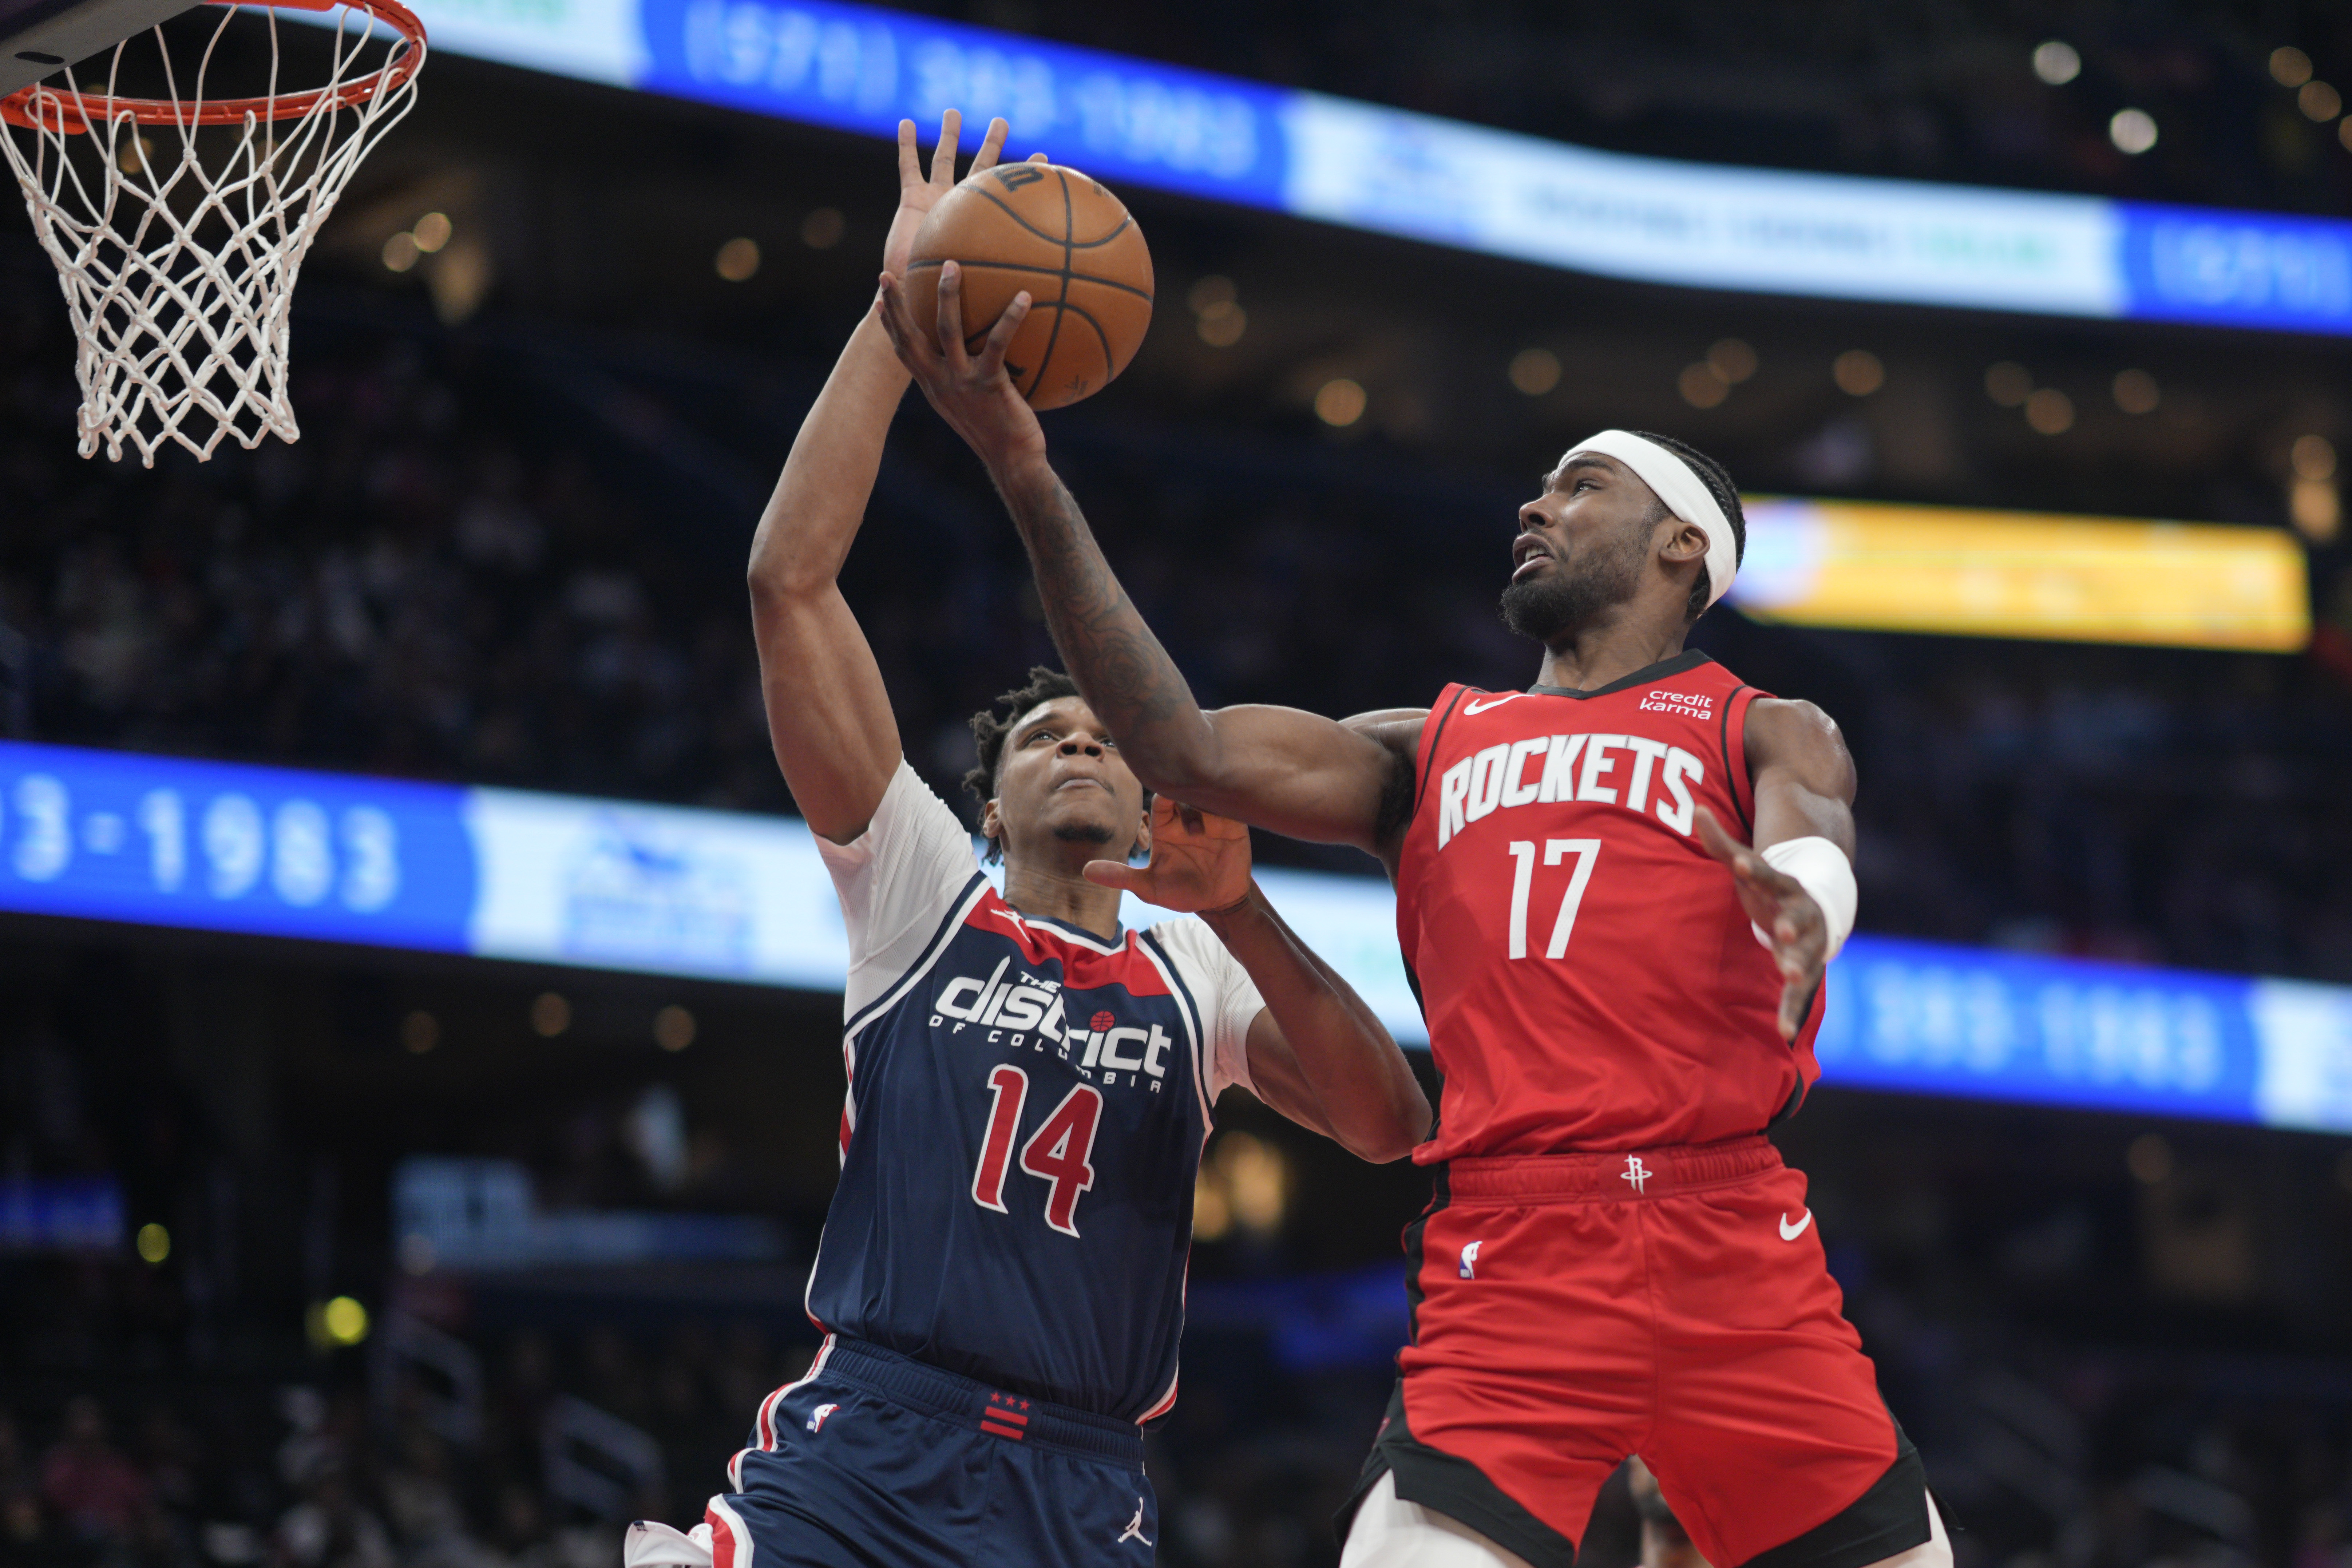 Rockets rally to top Wizards 114-109 in finale but Silas out